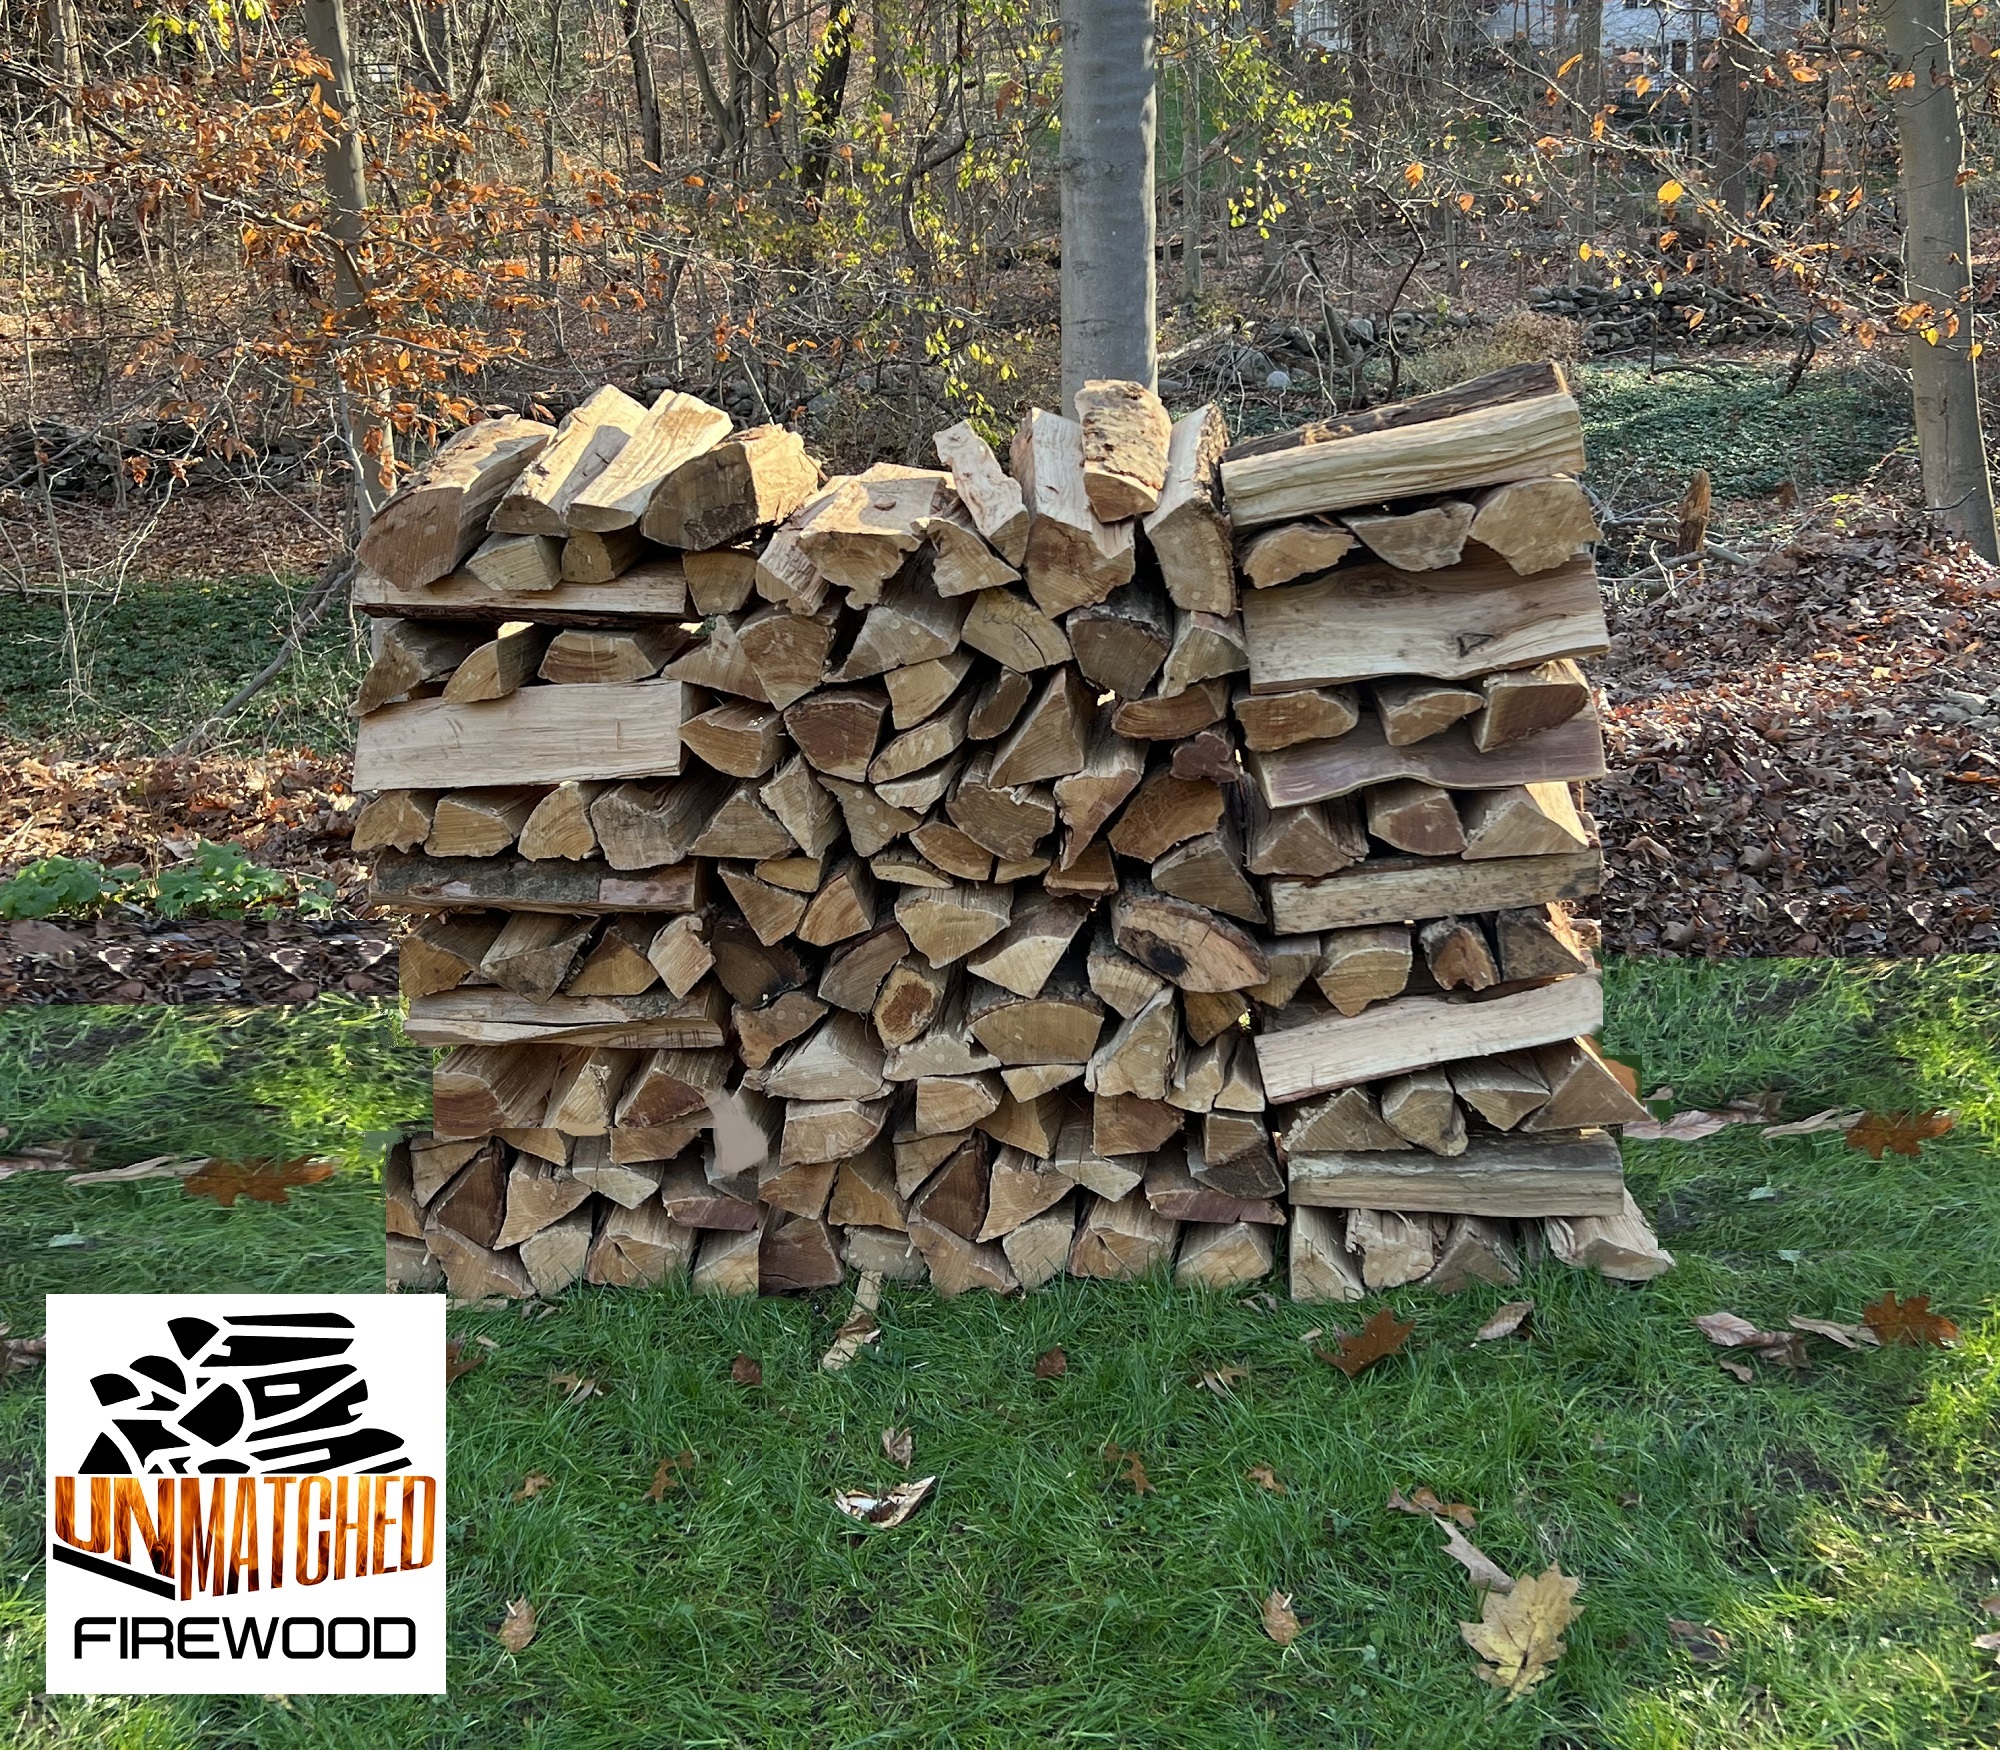 Unmatched Firewood: Old Greenwich Firewood